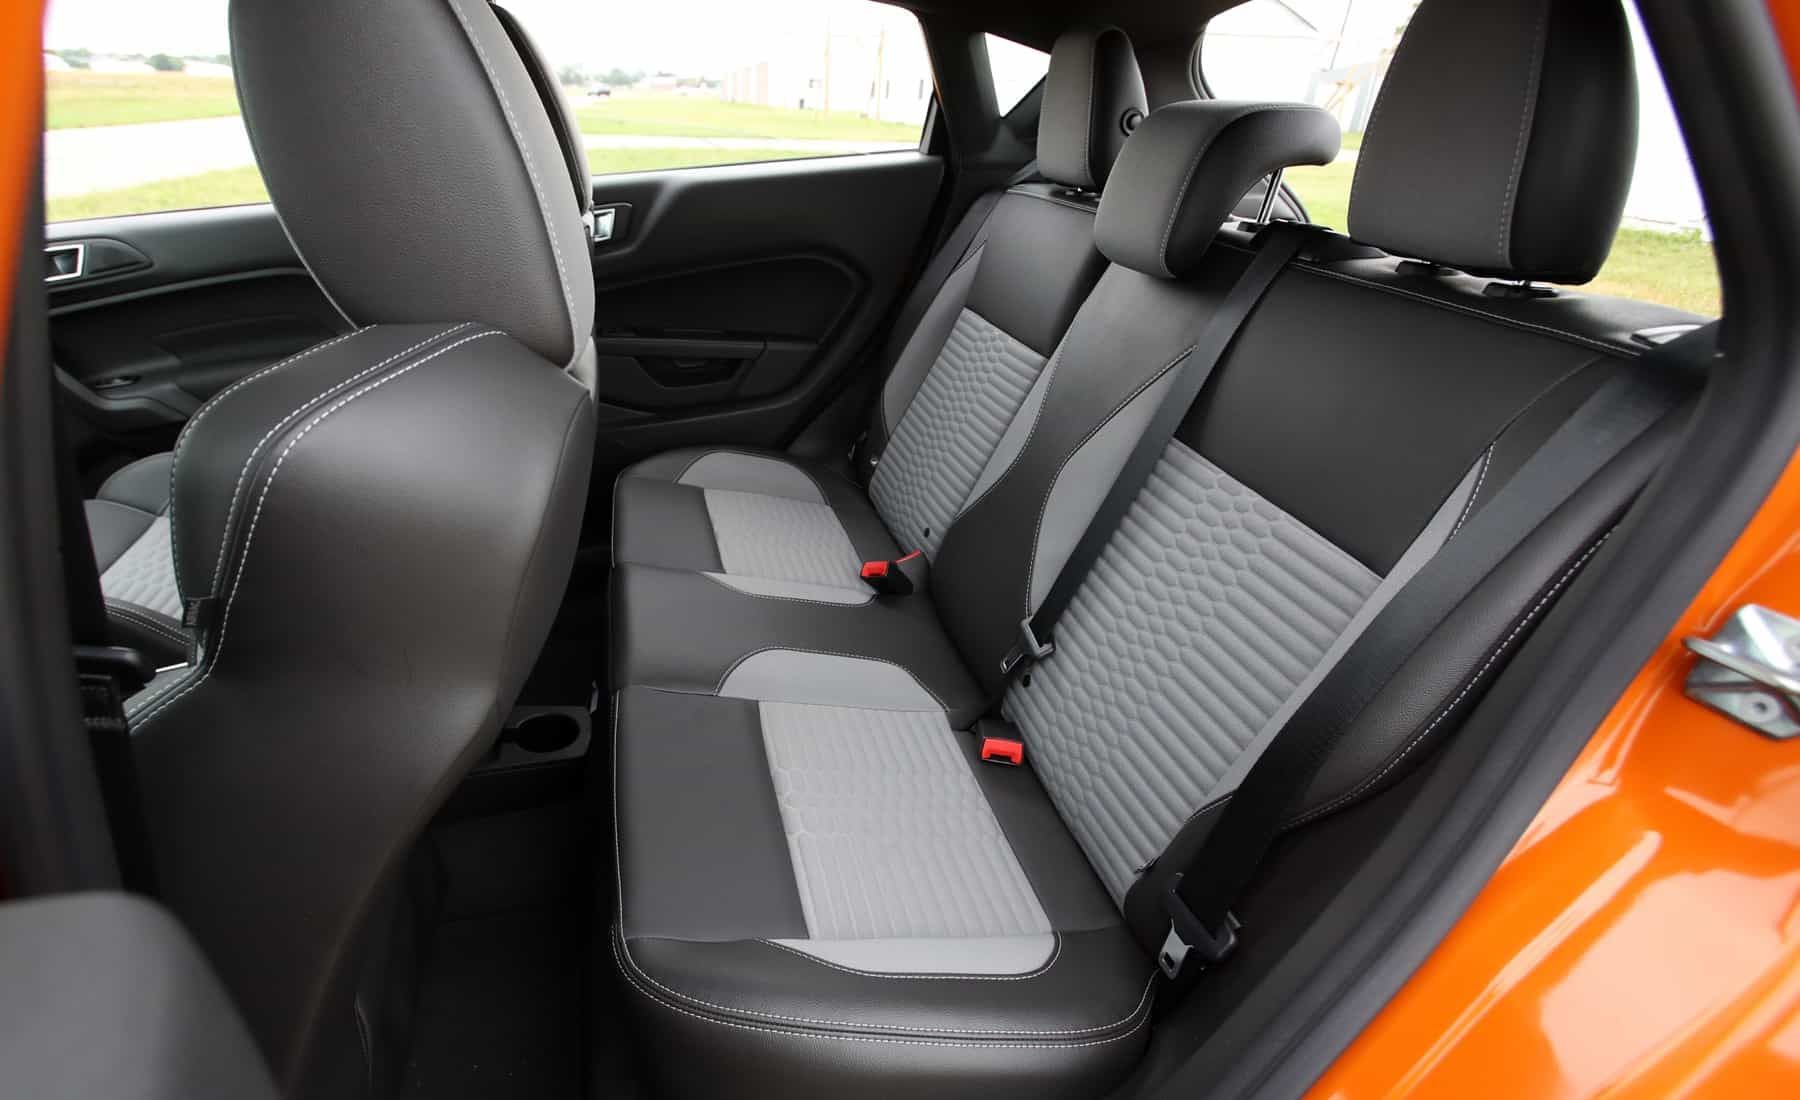 2017 Ford Fiesta ST Interior Seats Rear Passengers (View 23 of 47)